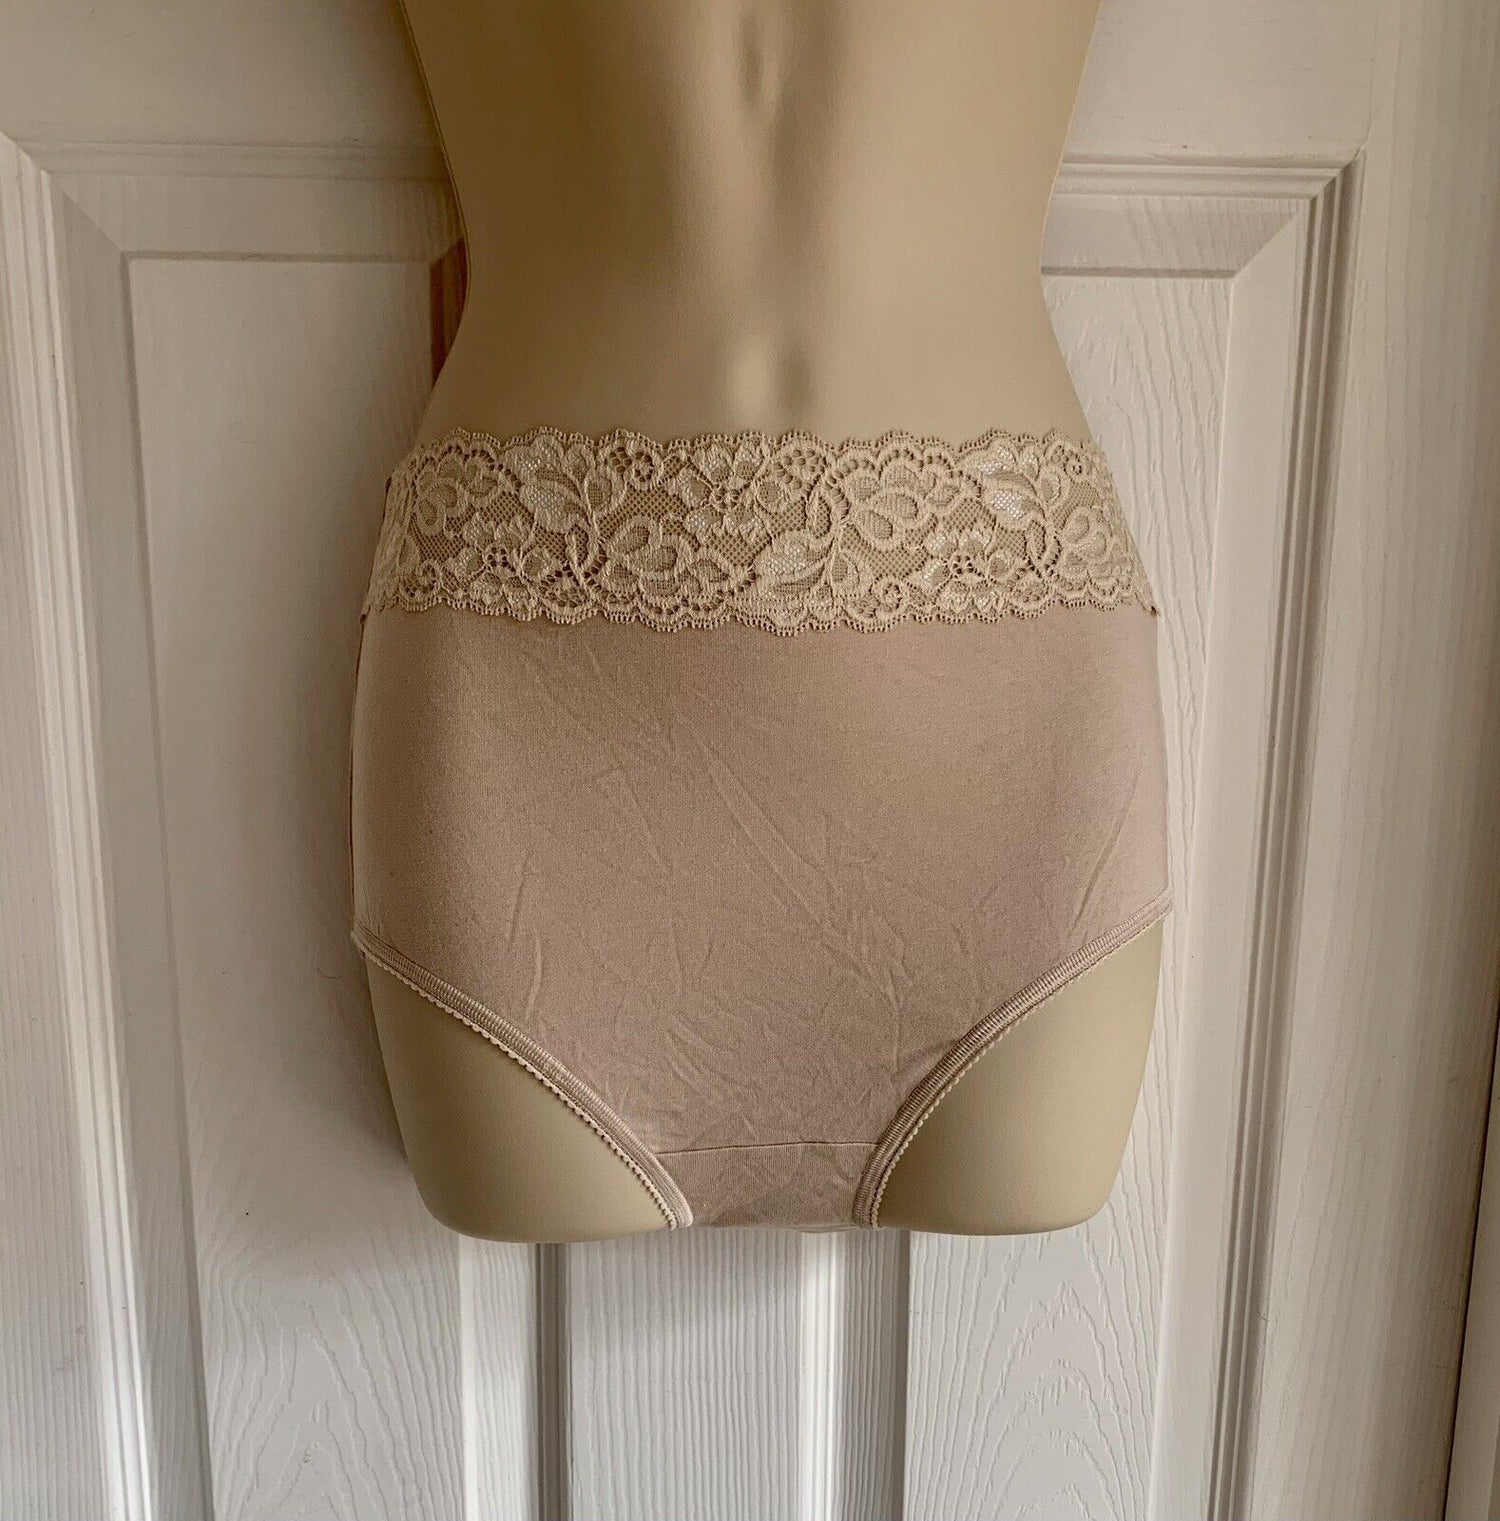 EX M*S Almond Lace Waist High Rise Full Briefs in Sizes 10, 14, 18, 22